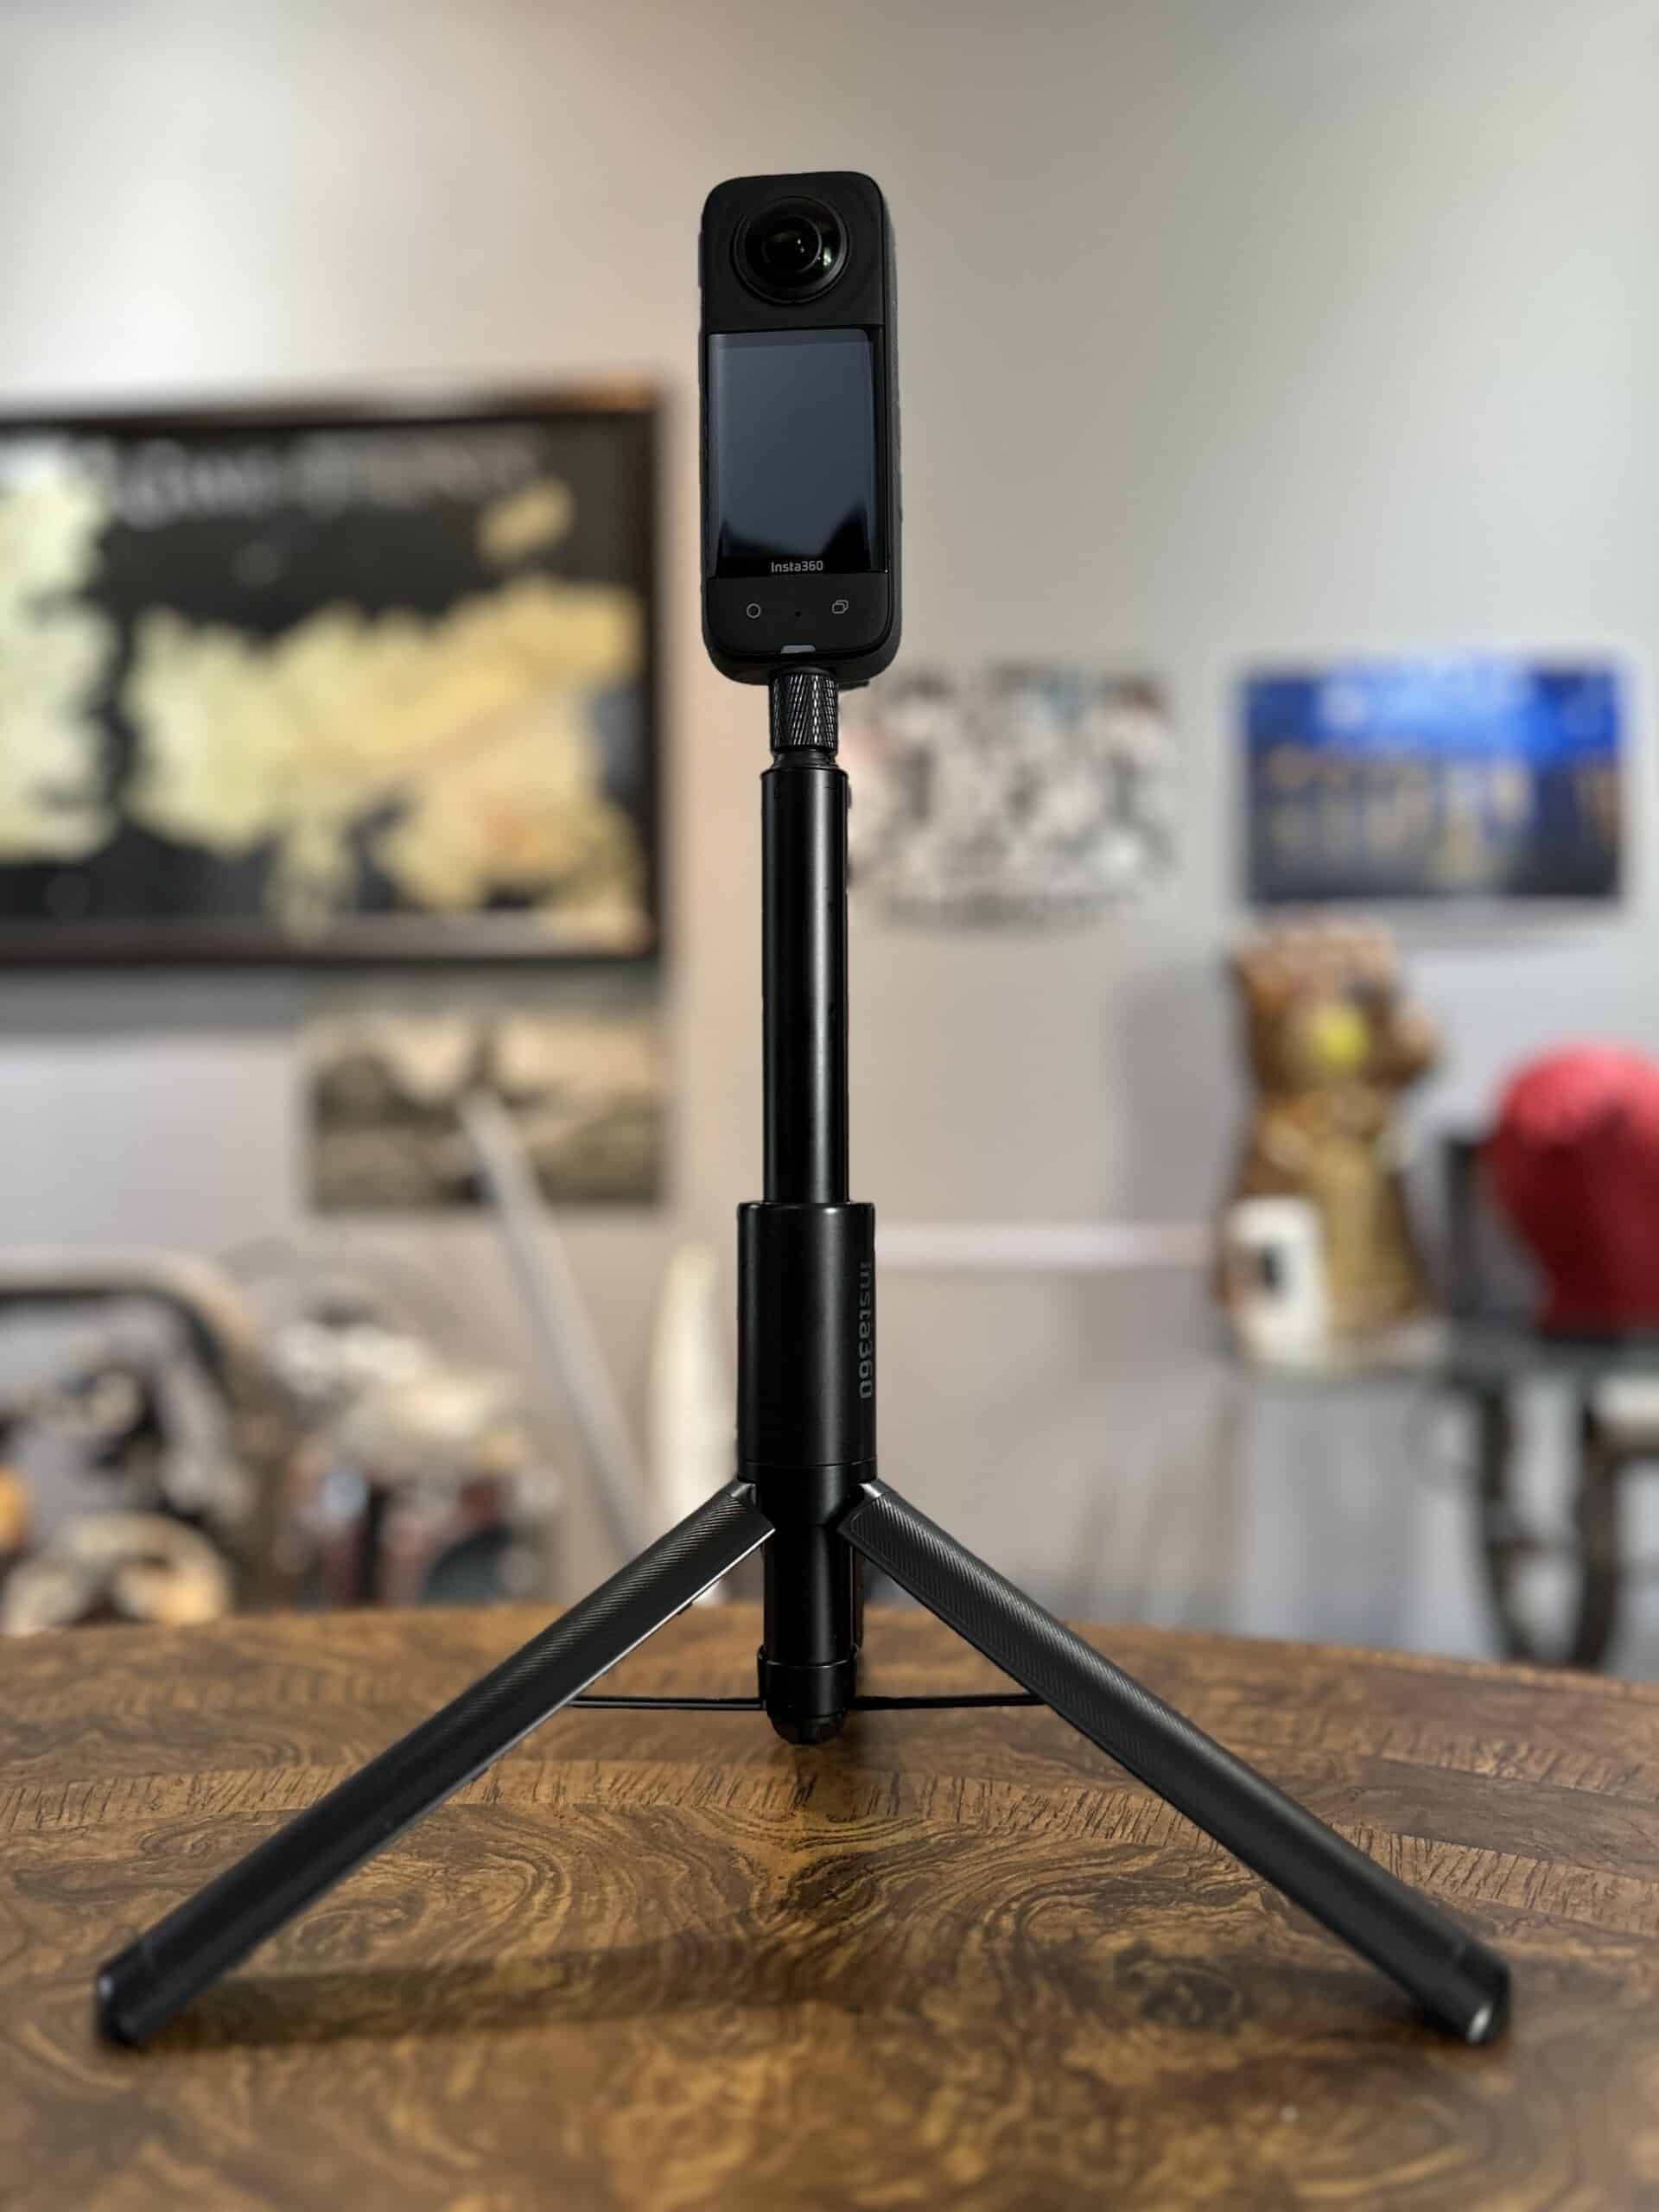 Insta360 X3 camera on a invisible selfie stick and tripod: Insta360 has the best 360 cameras in the industry